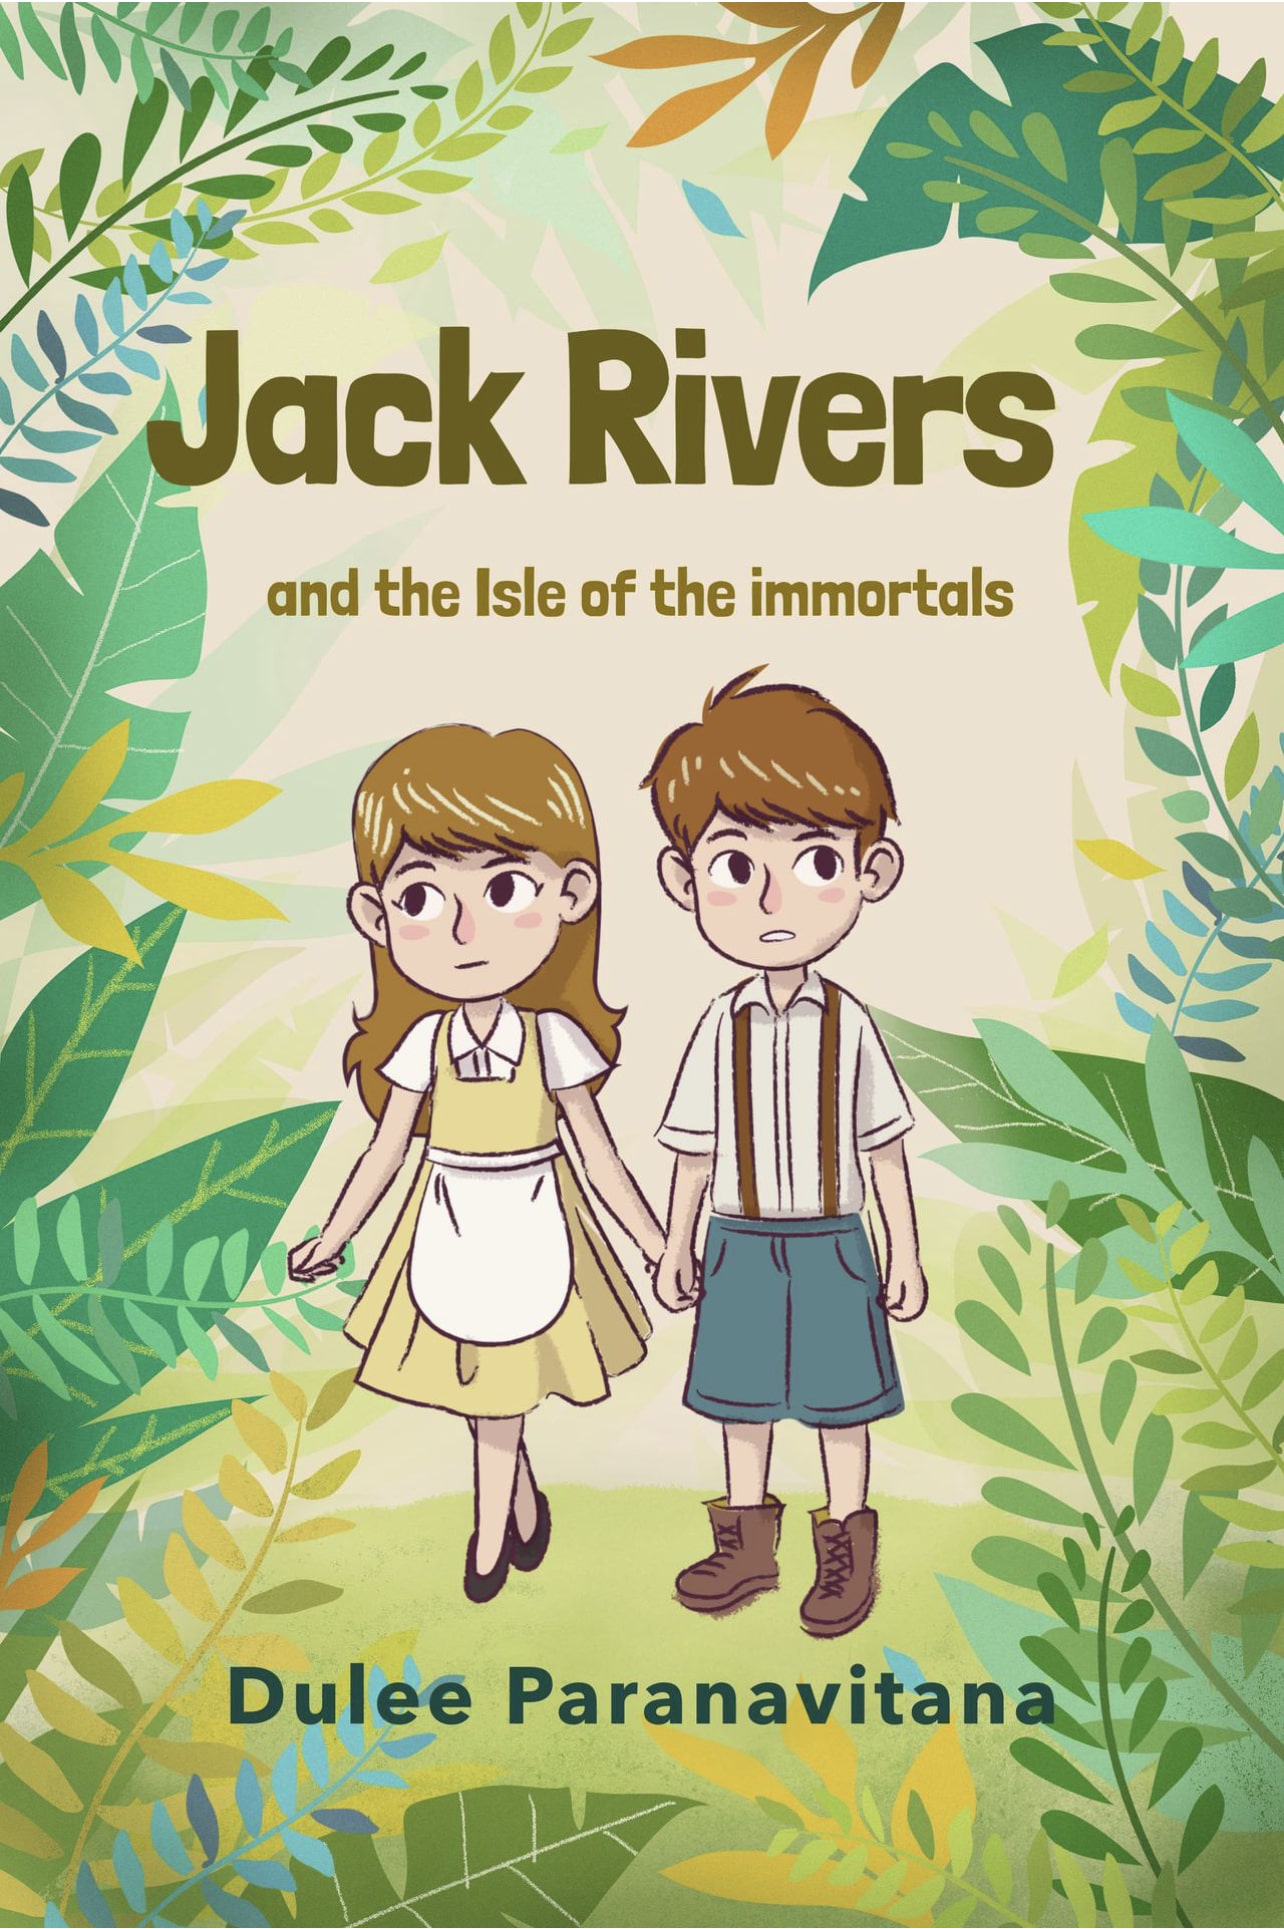 FREE: Jack Rivers and the Isle of the Immortals by Dulee Paranavitana